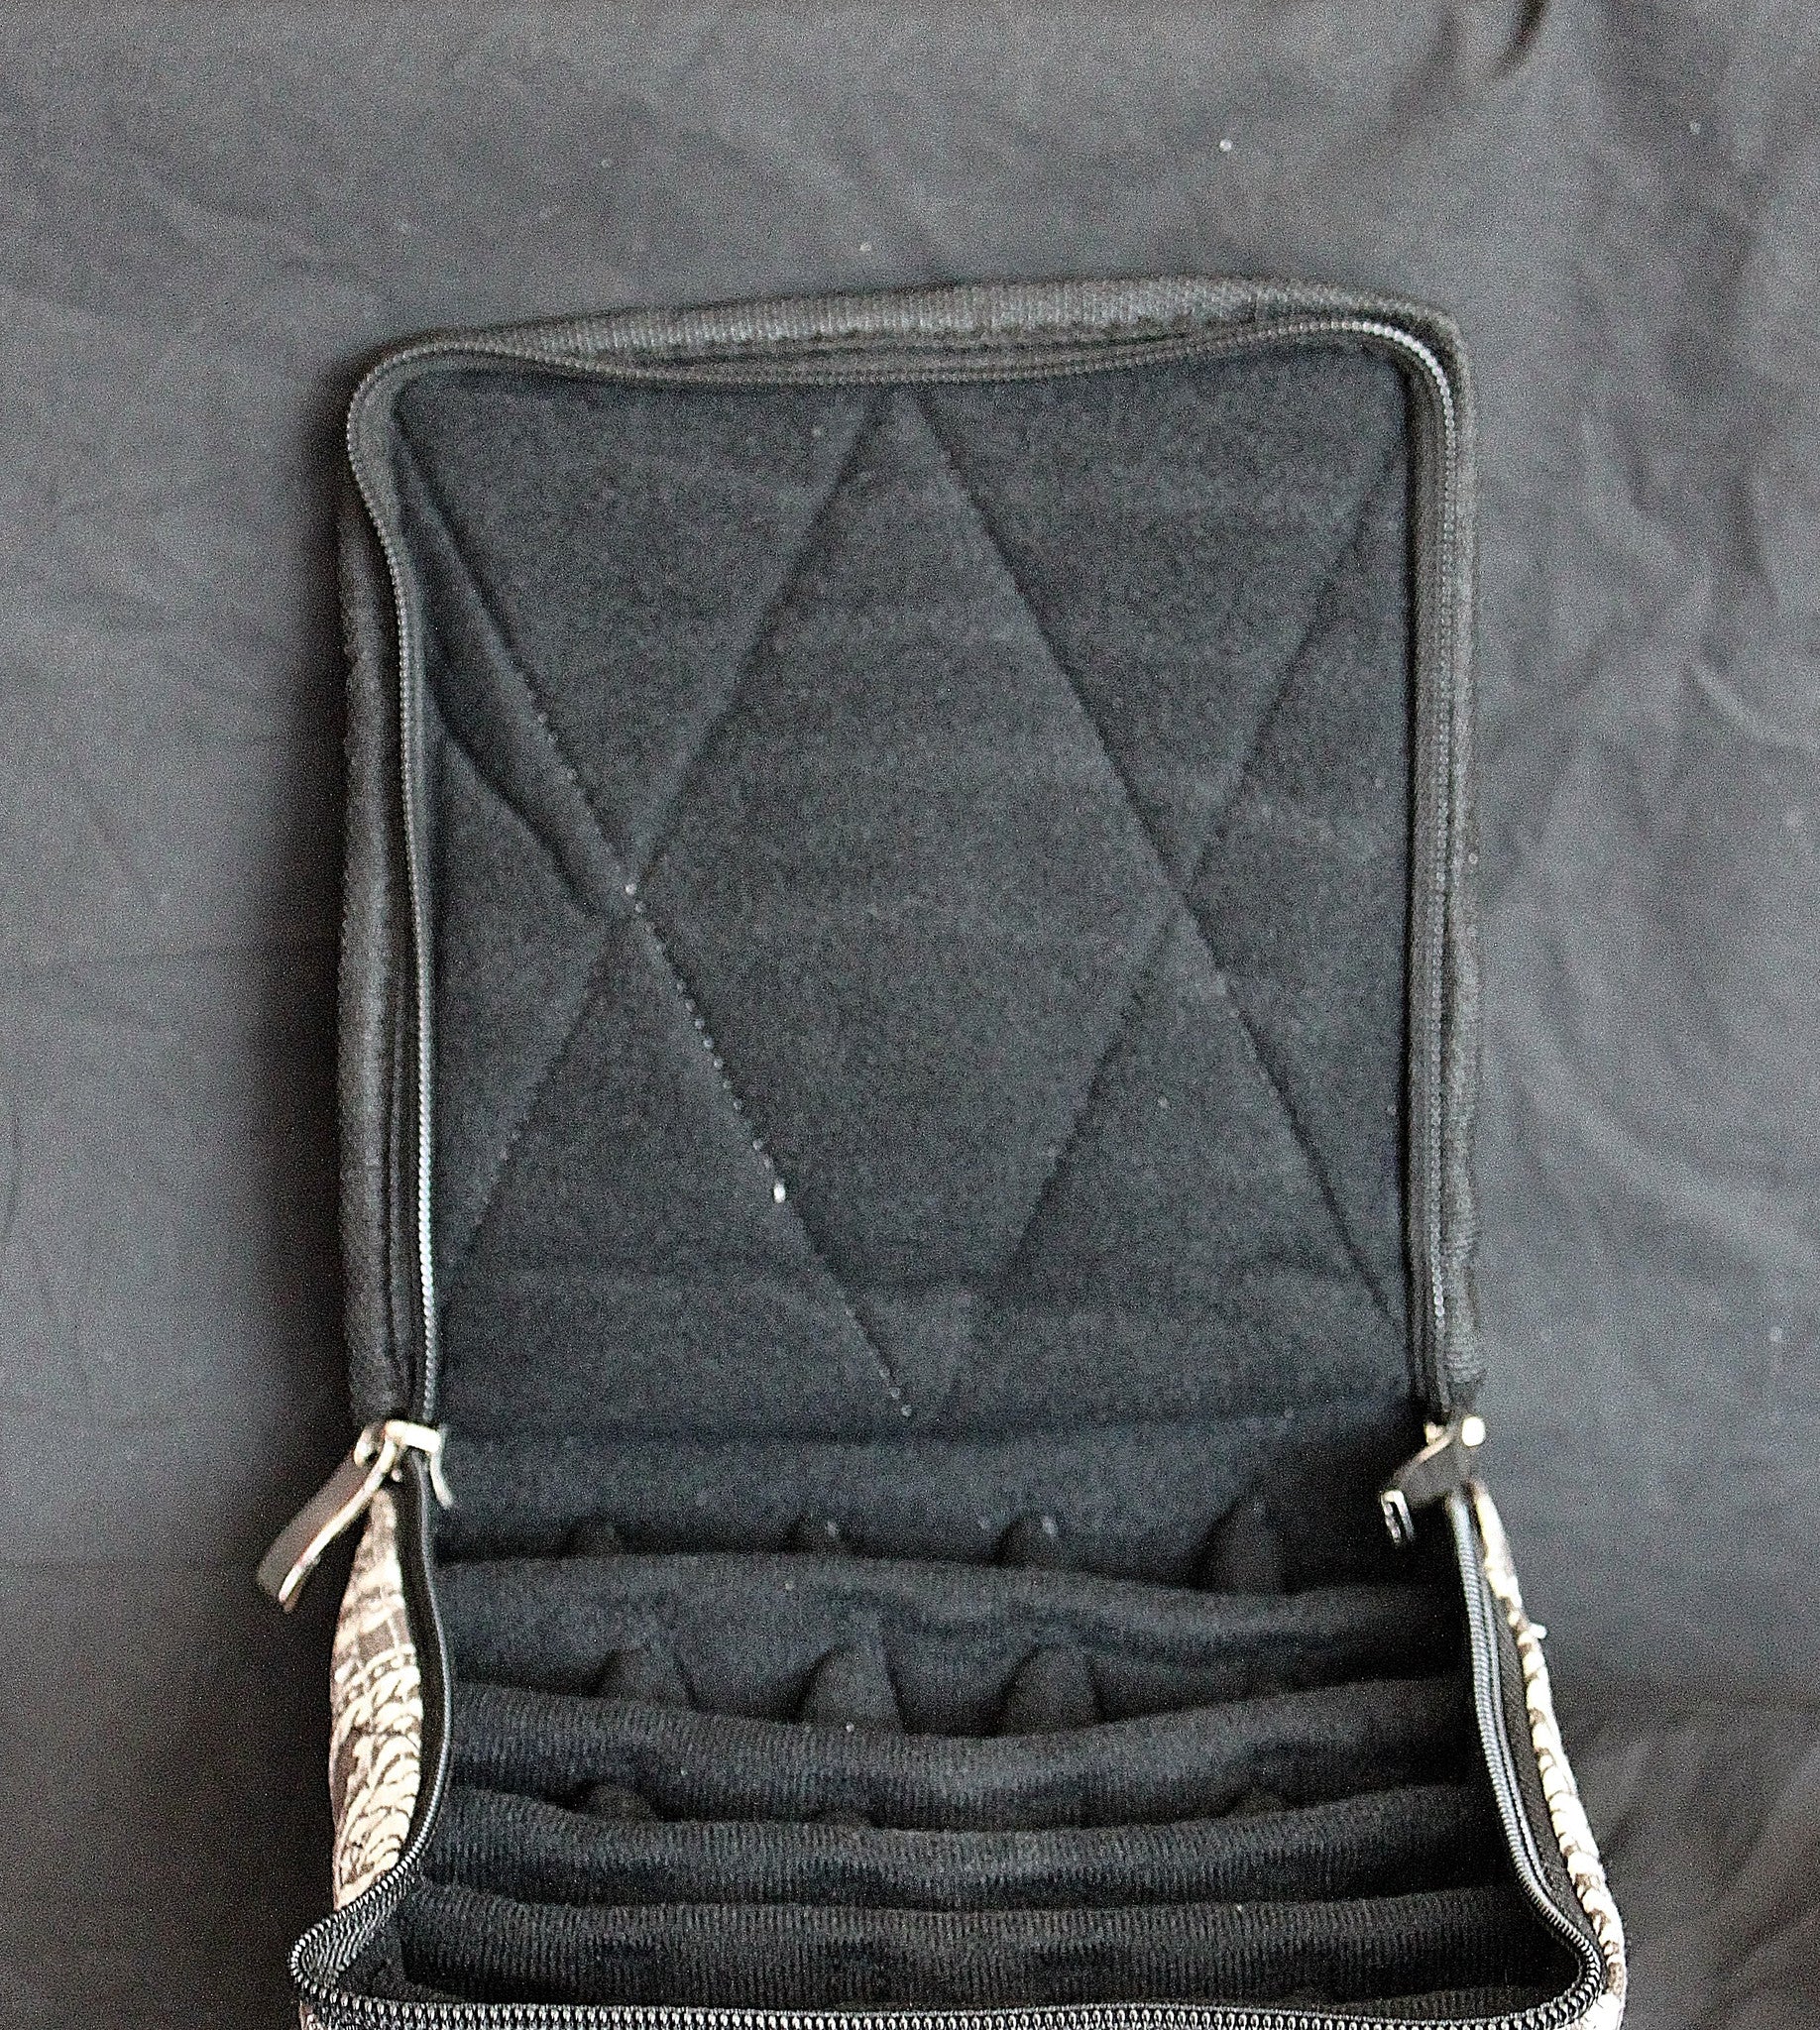 Large Durable Solid Black Essential Oil Carrying Case